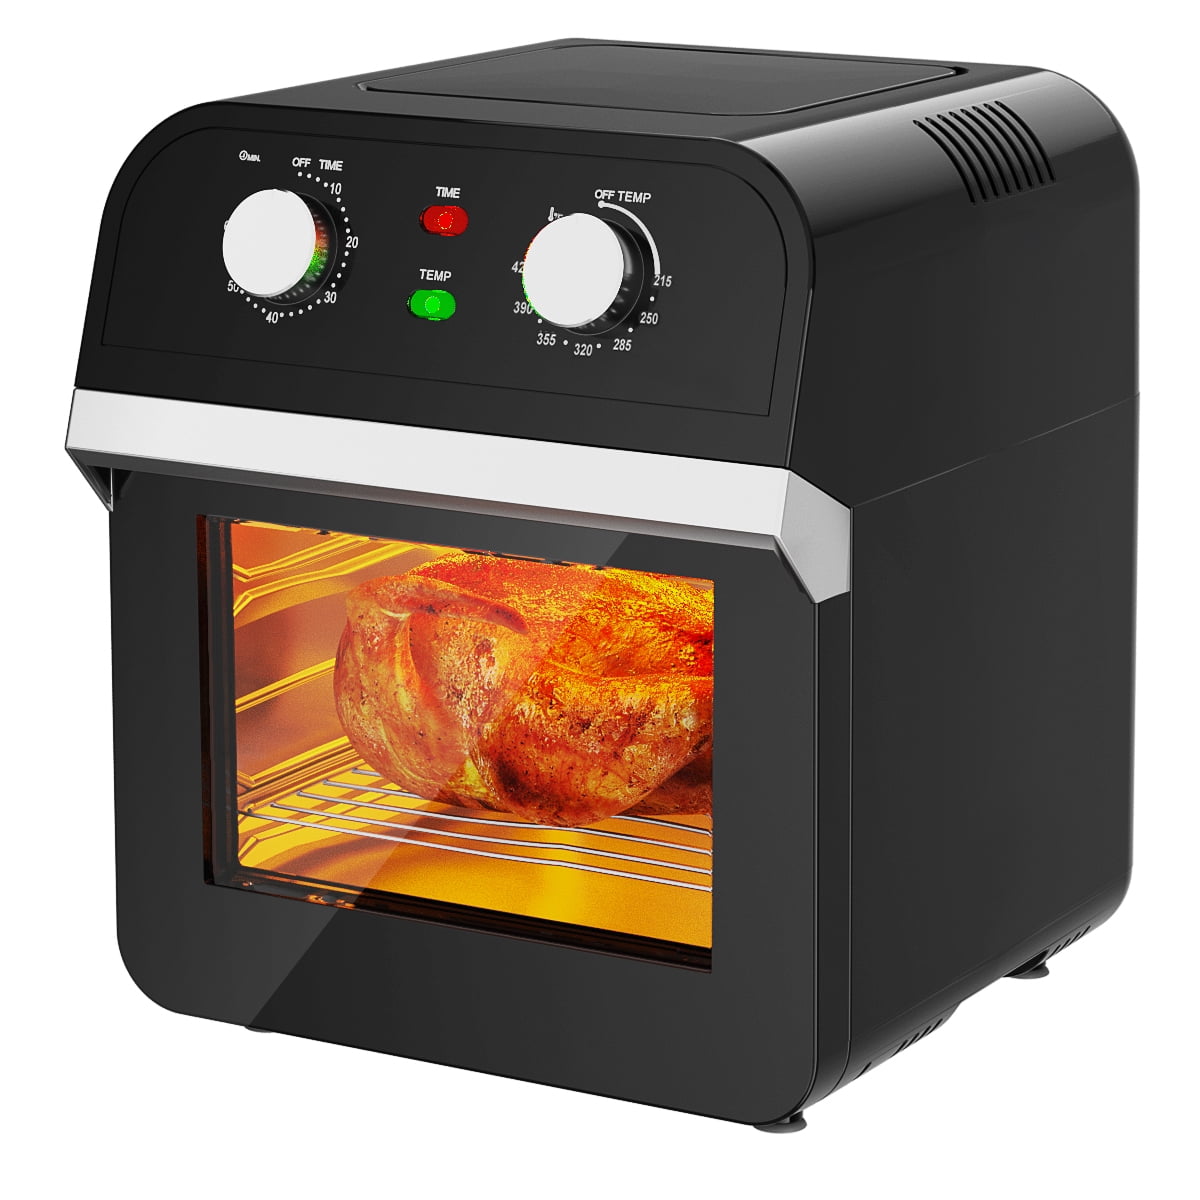  Ultrean Air Fryer oven, 12.5 Quart Airfryer Toaster Oven with  Rotisserie,Bake,Dehydrator,Auto Shutoff and 8 Touch Screen Preset, 8  Accessories & 50 Recipes : Home & Kitchen